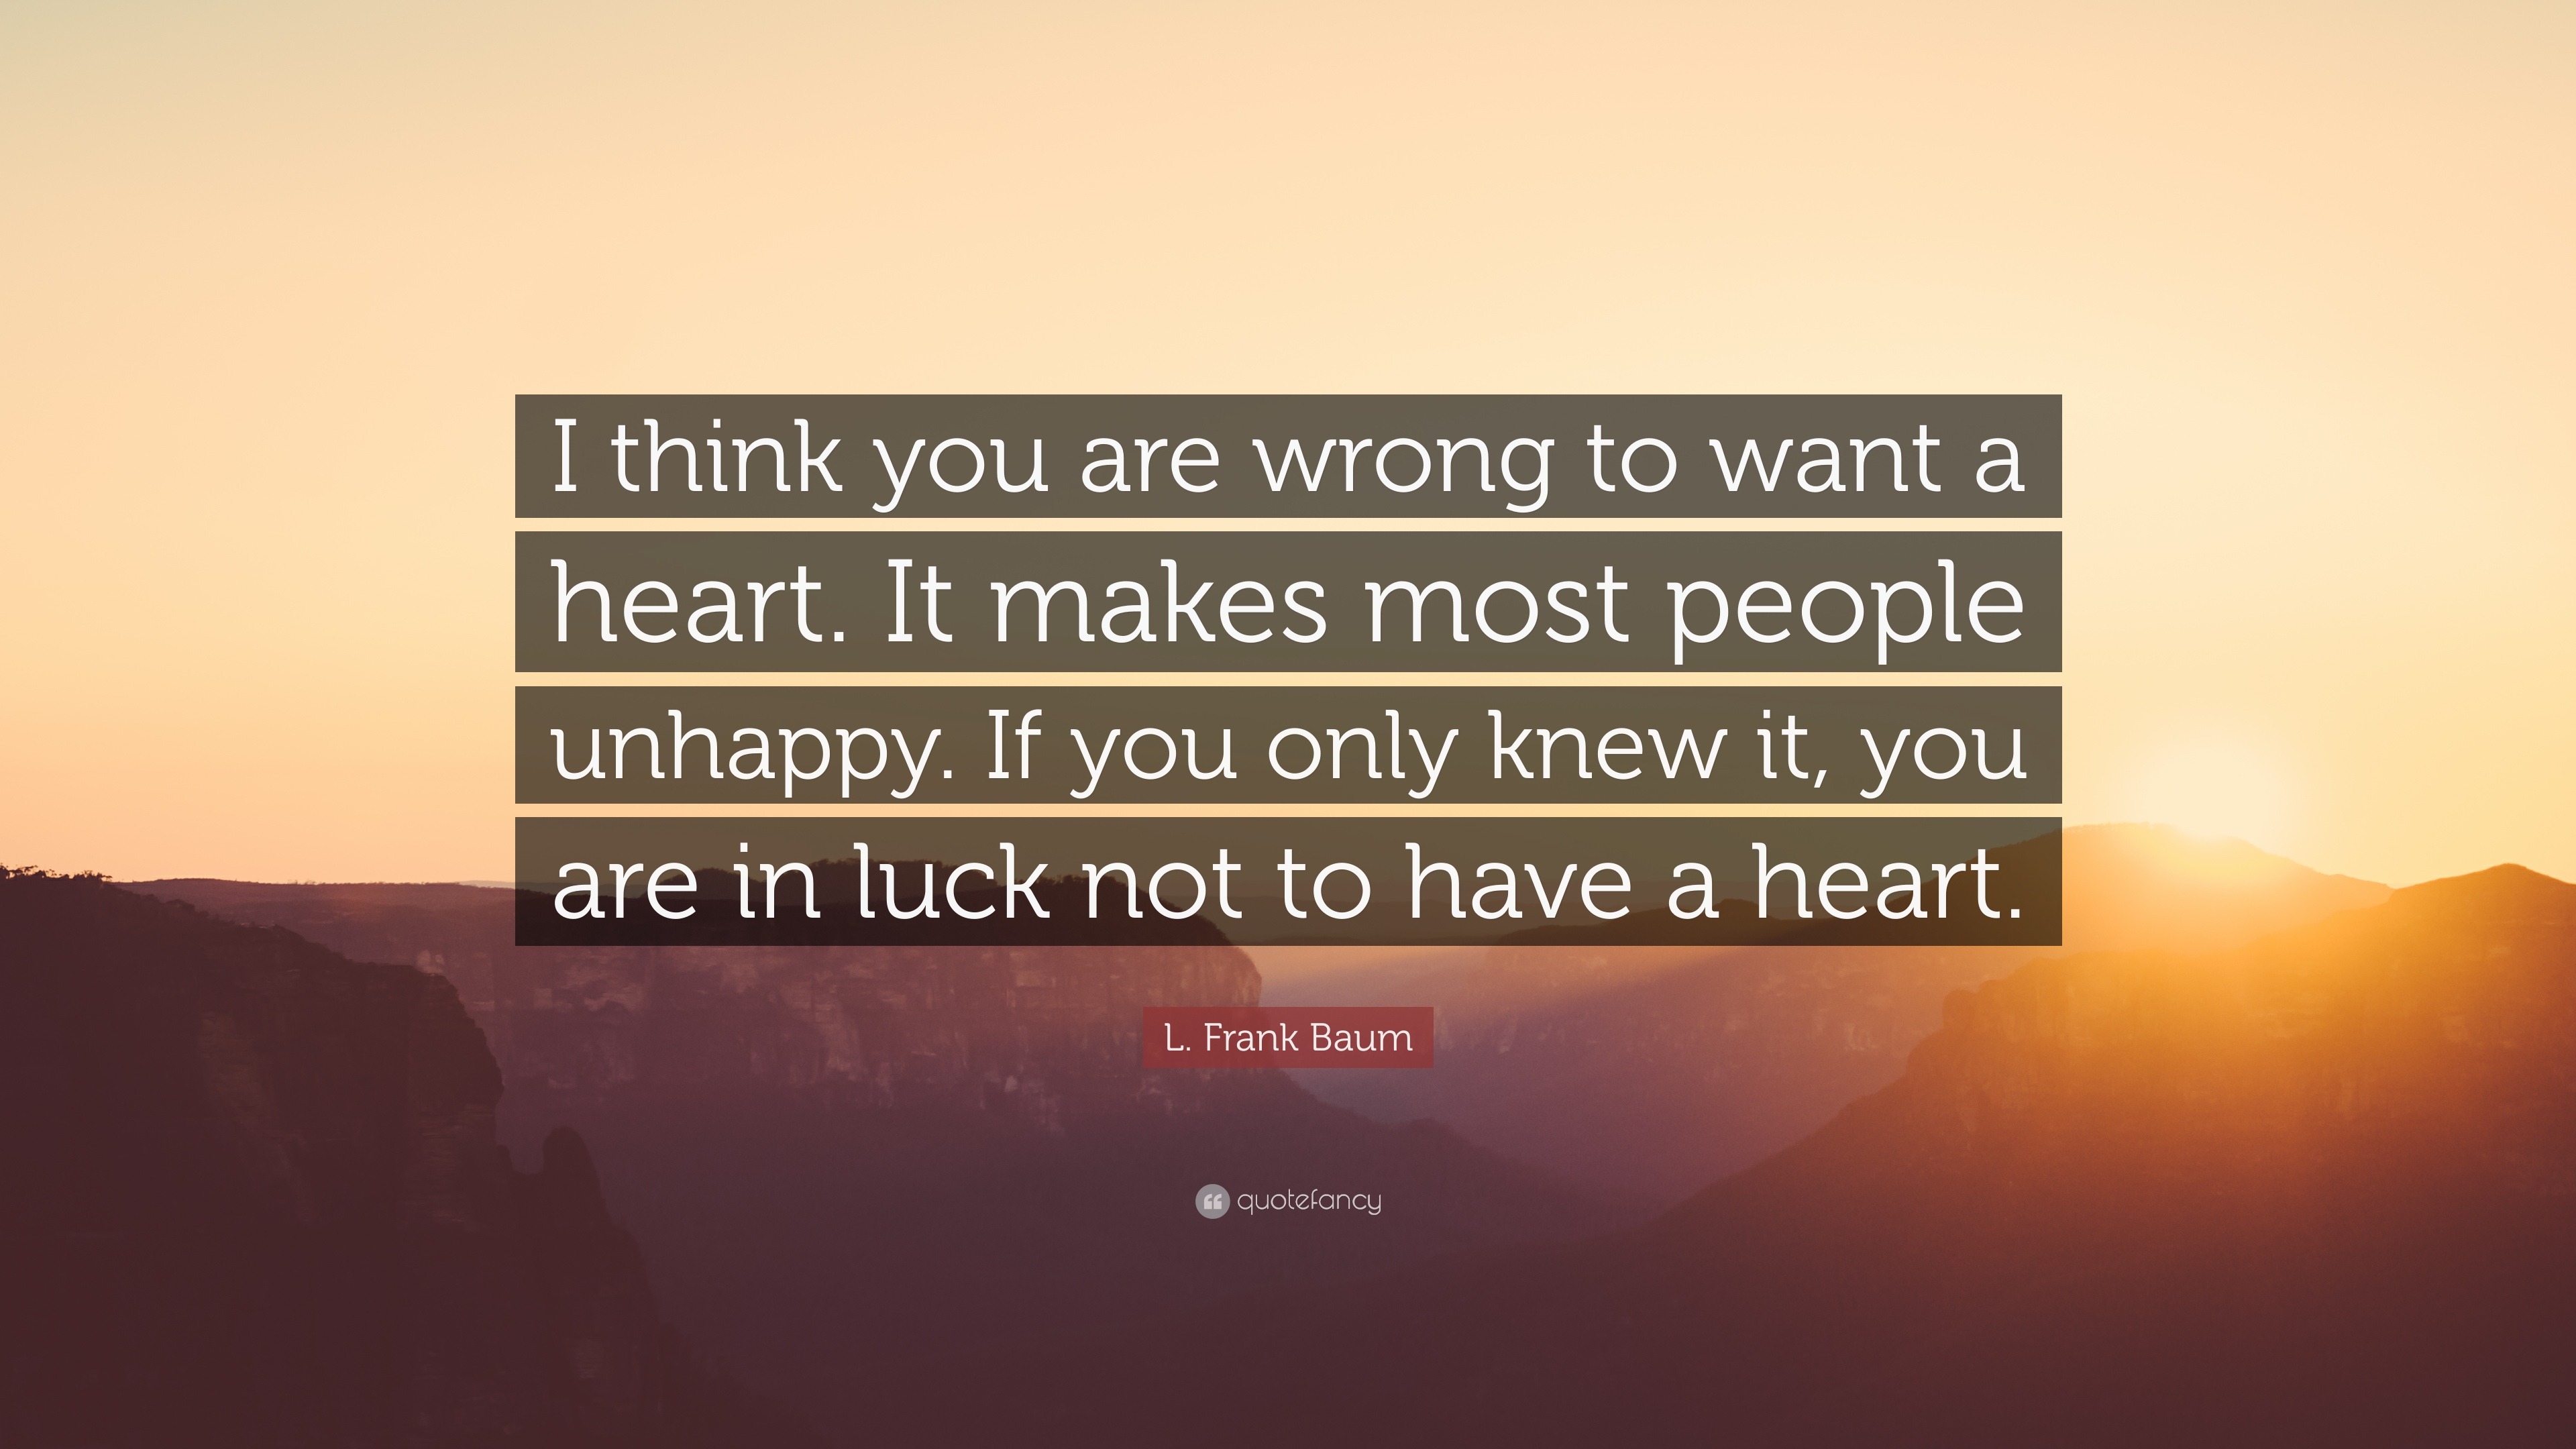 L Frank Baum Quote “I think you are wrong to want a heart